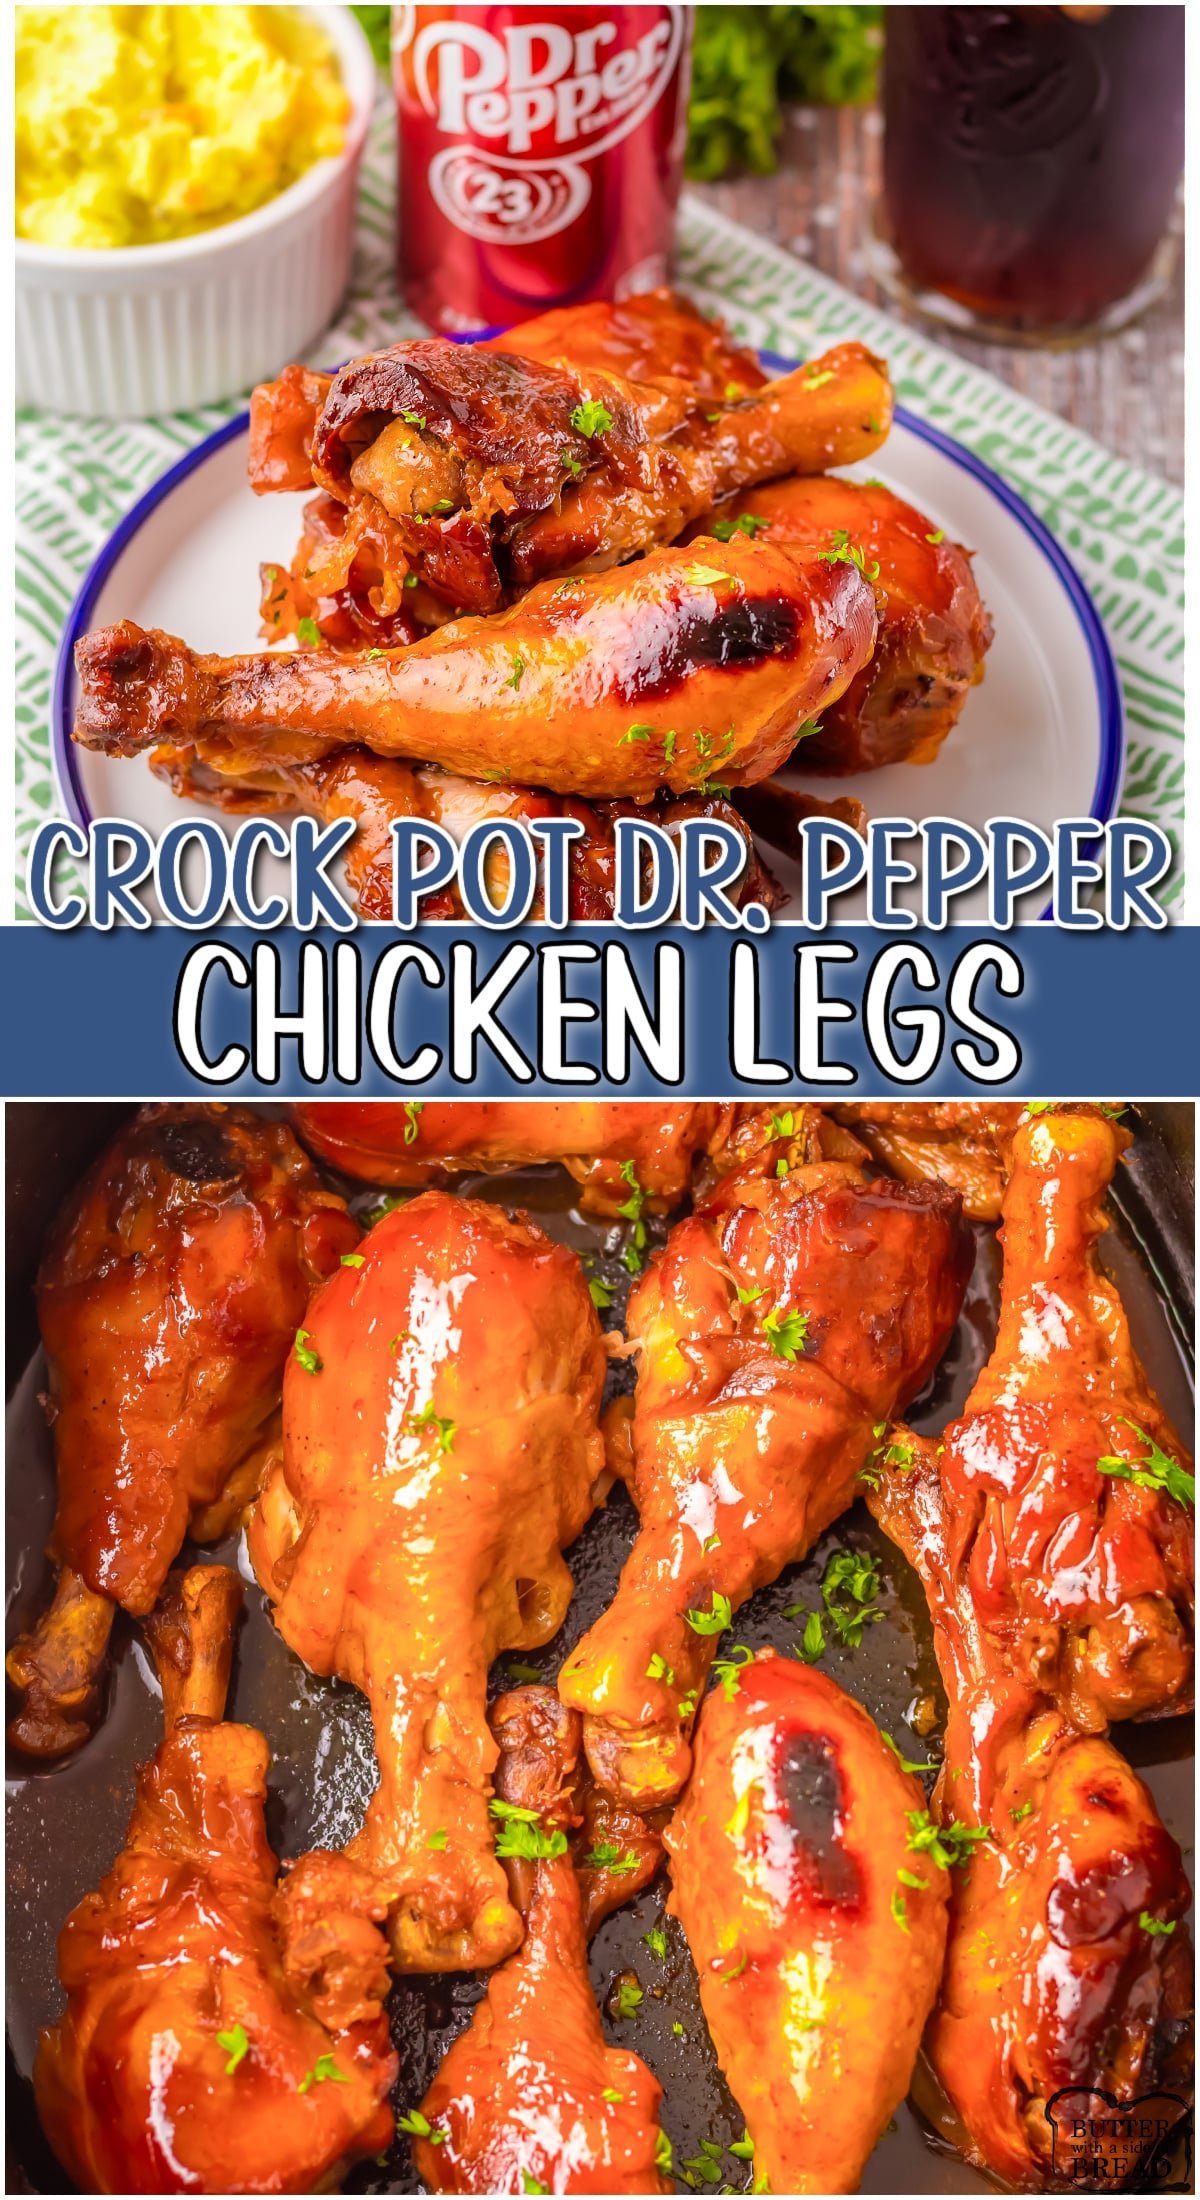 Crockpot Dr. Pepper Chicken Legs are tender, fall-off-the bone chicken drumsticks that slow cook in a Dr. Pepper BBQ sauce everyone loves!